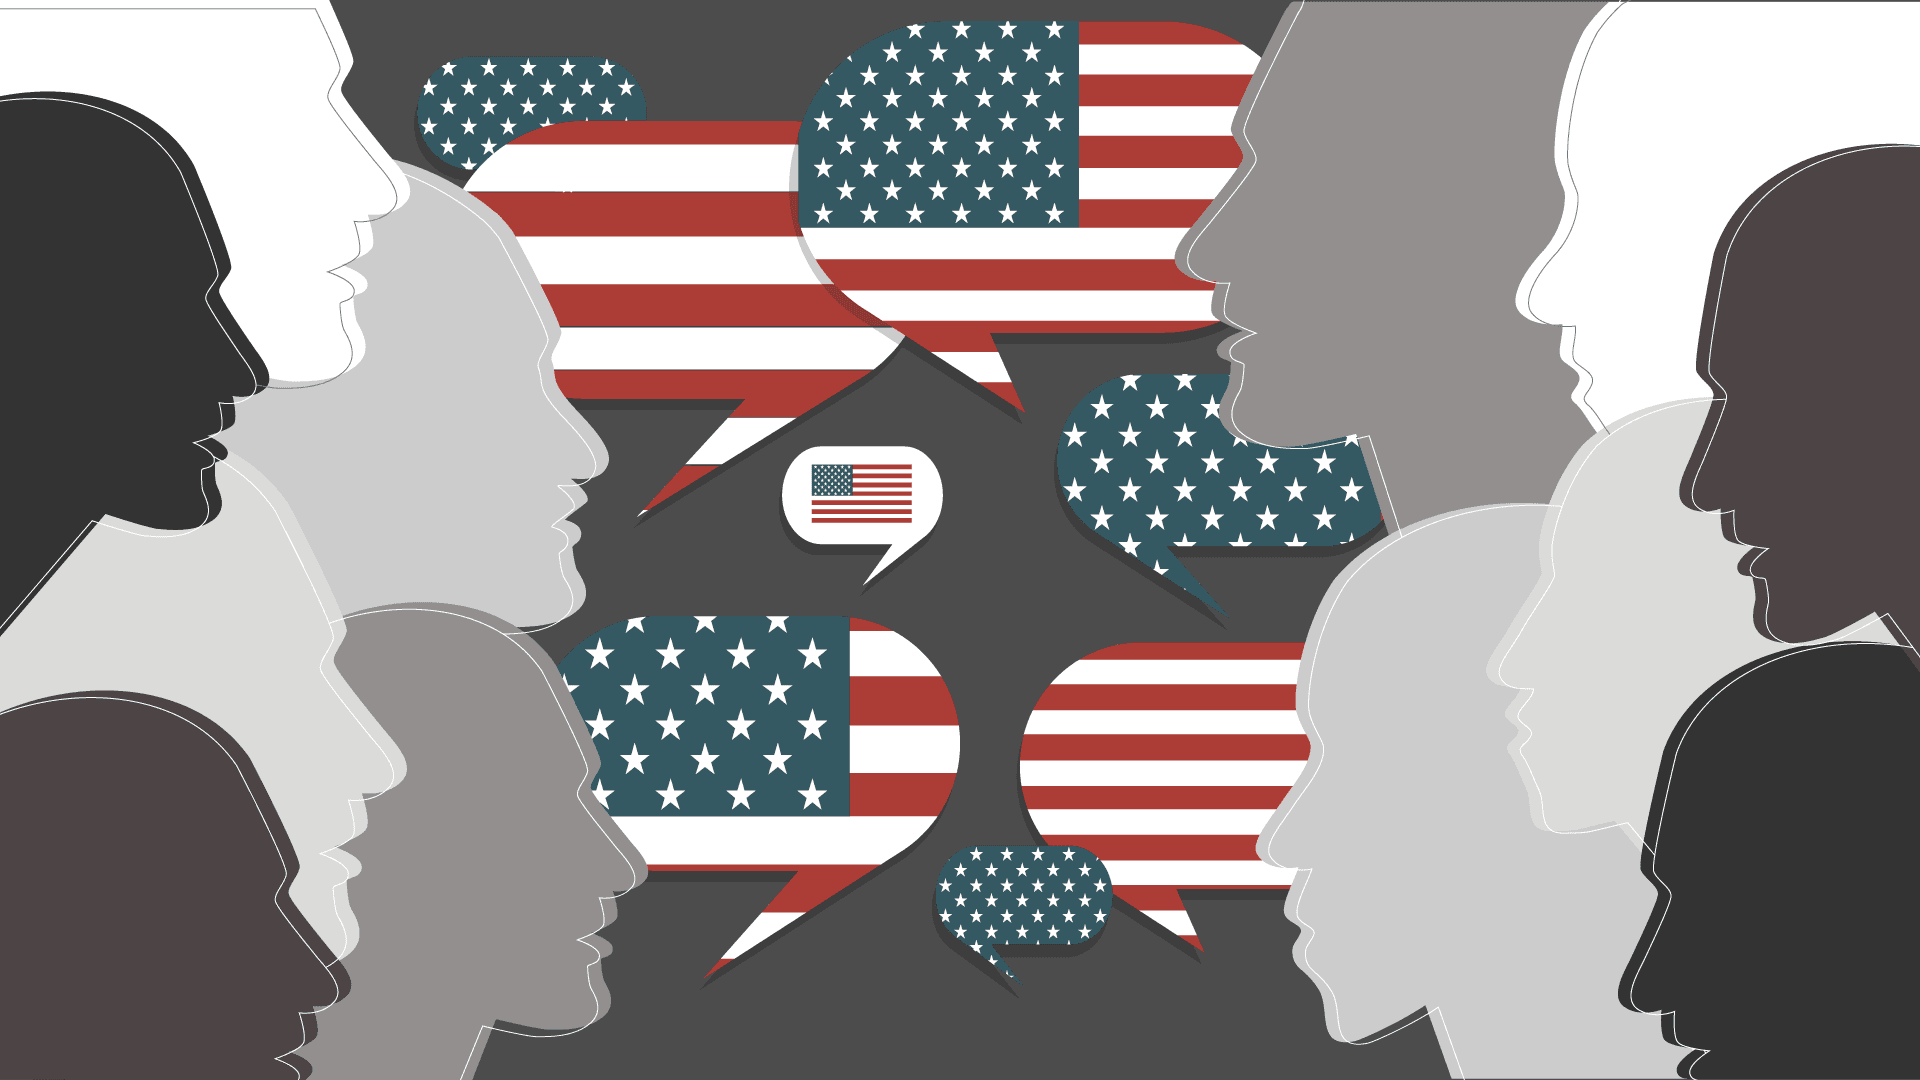 Illustration of gray silhouettes with American flag speech bubbles